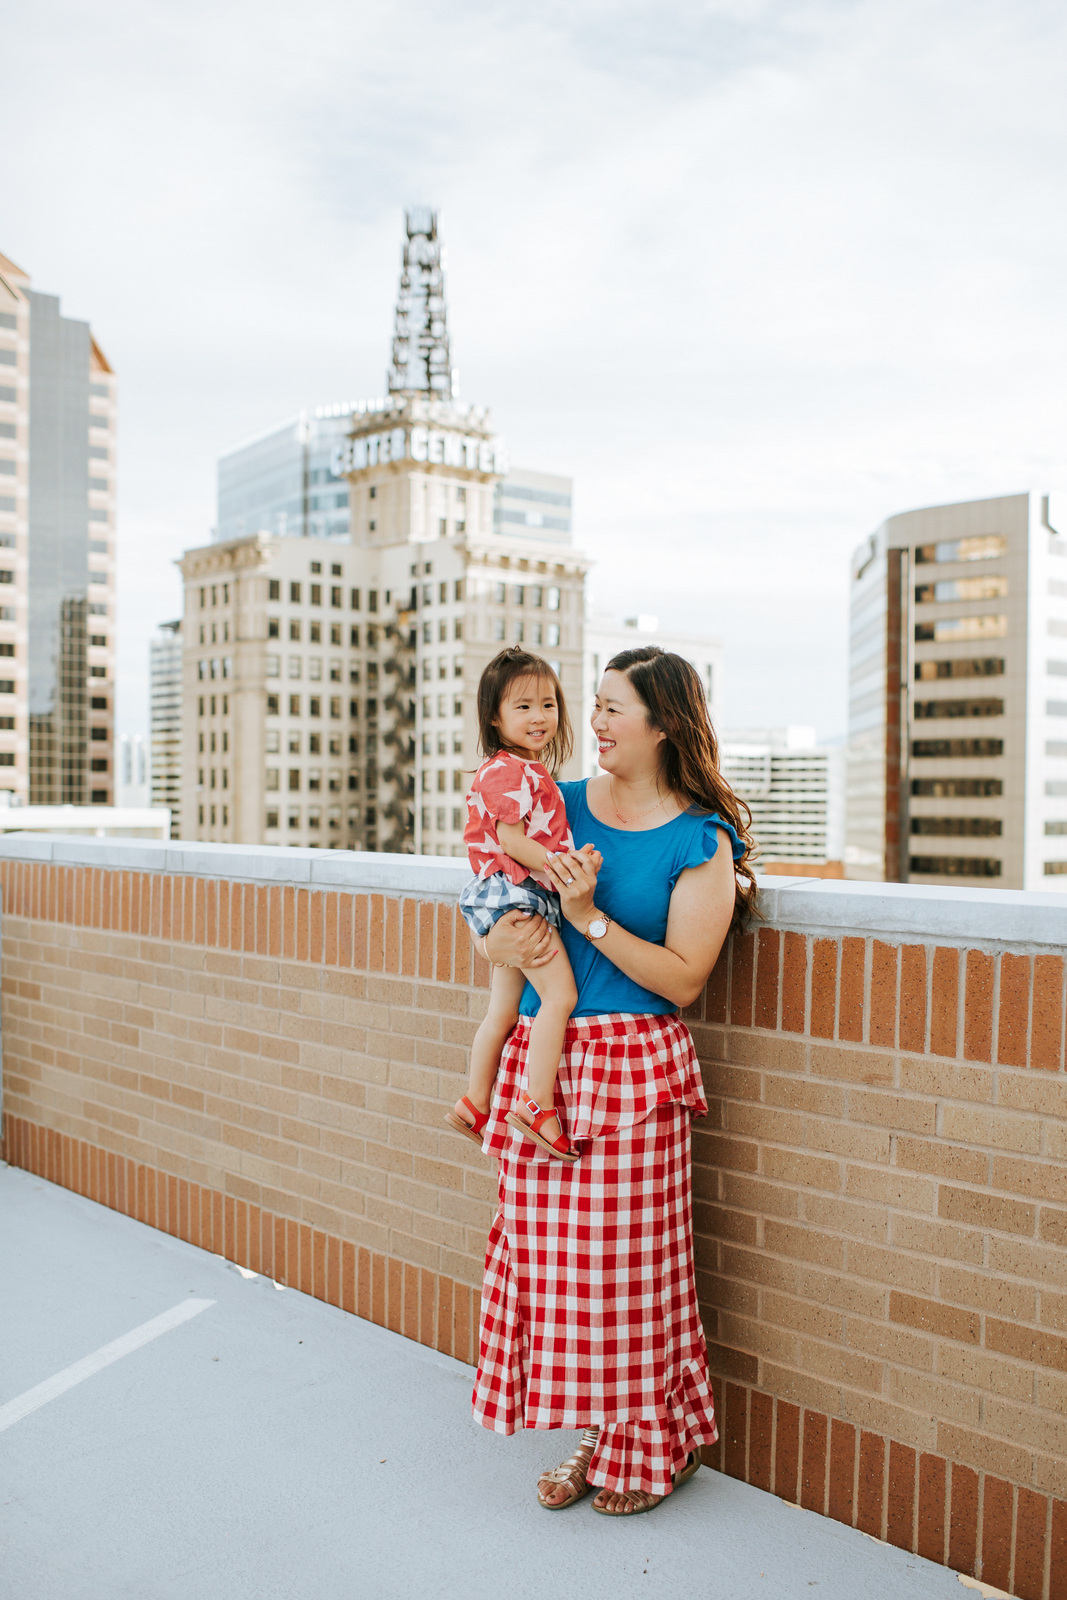 Happy 4th of July! - Red, White, and Blue Patriotic Outfits for the Whole Family by Utah fashion blogger Sandy A La Mode